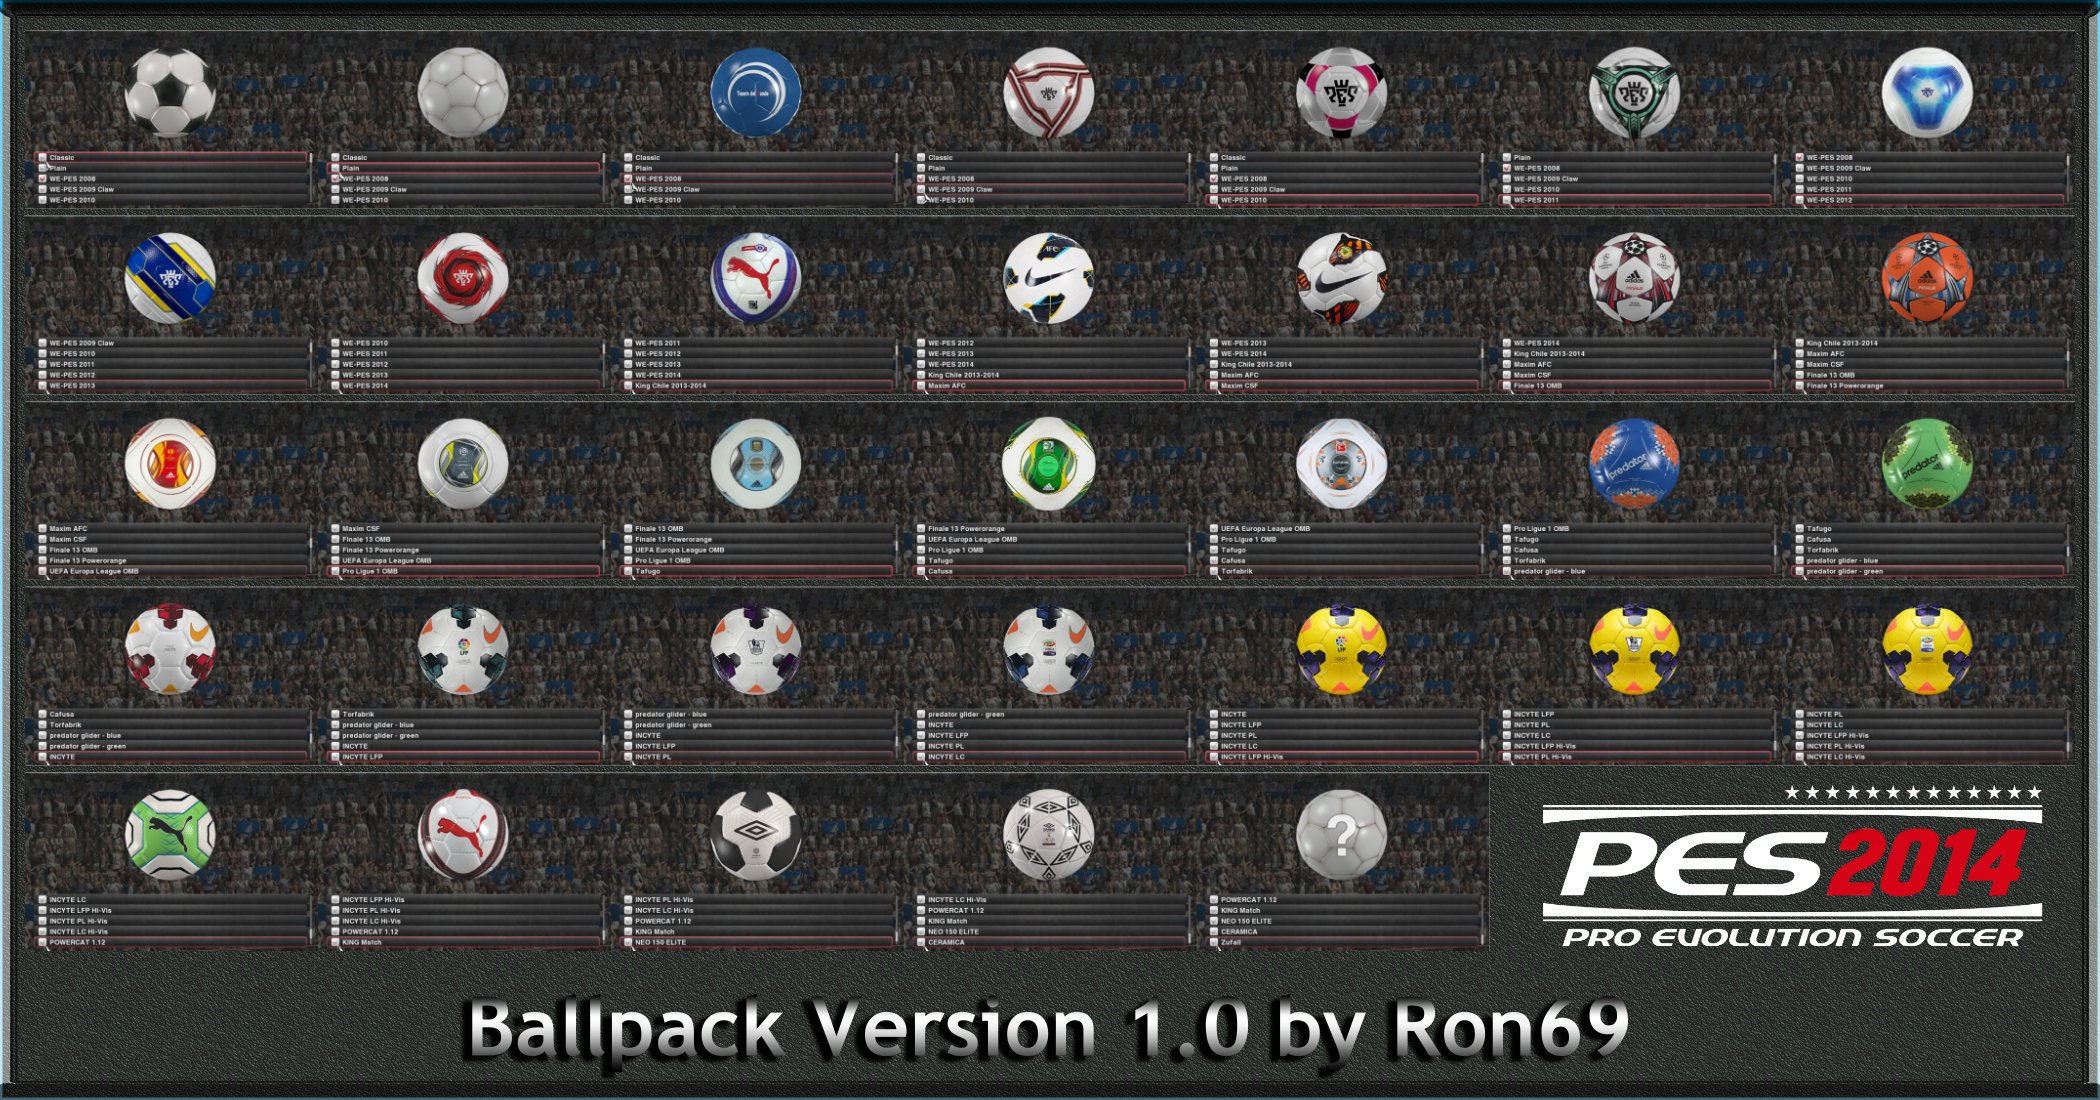 PES 2014 Ballpack 1.0 by Ron69